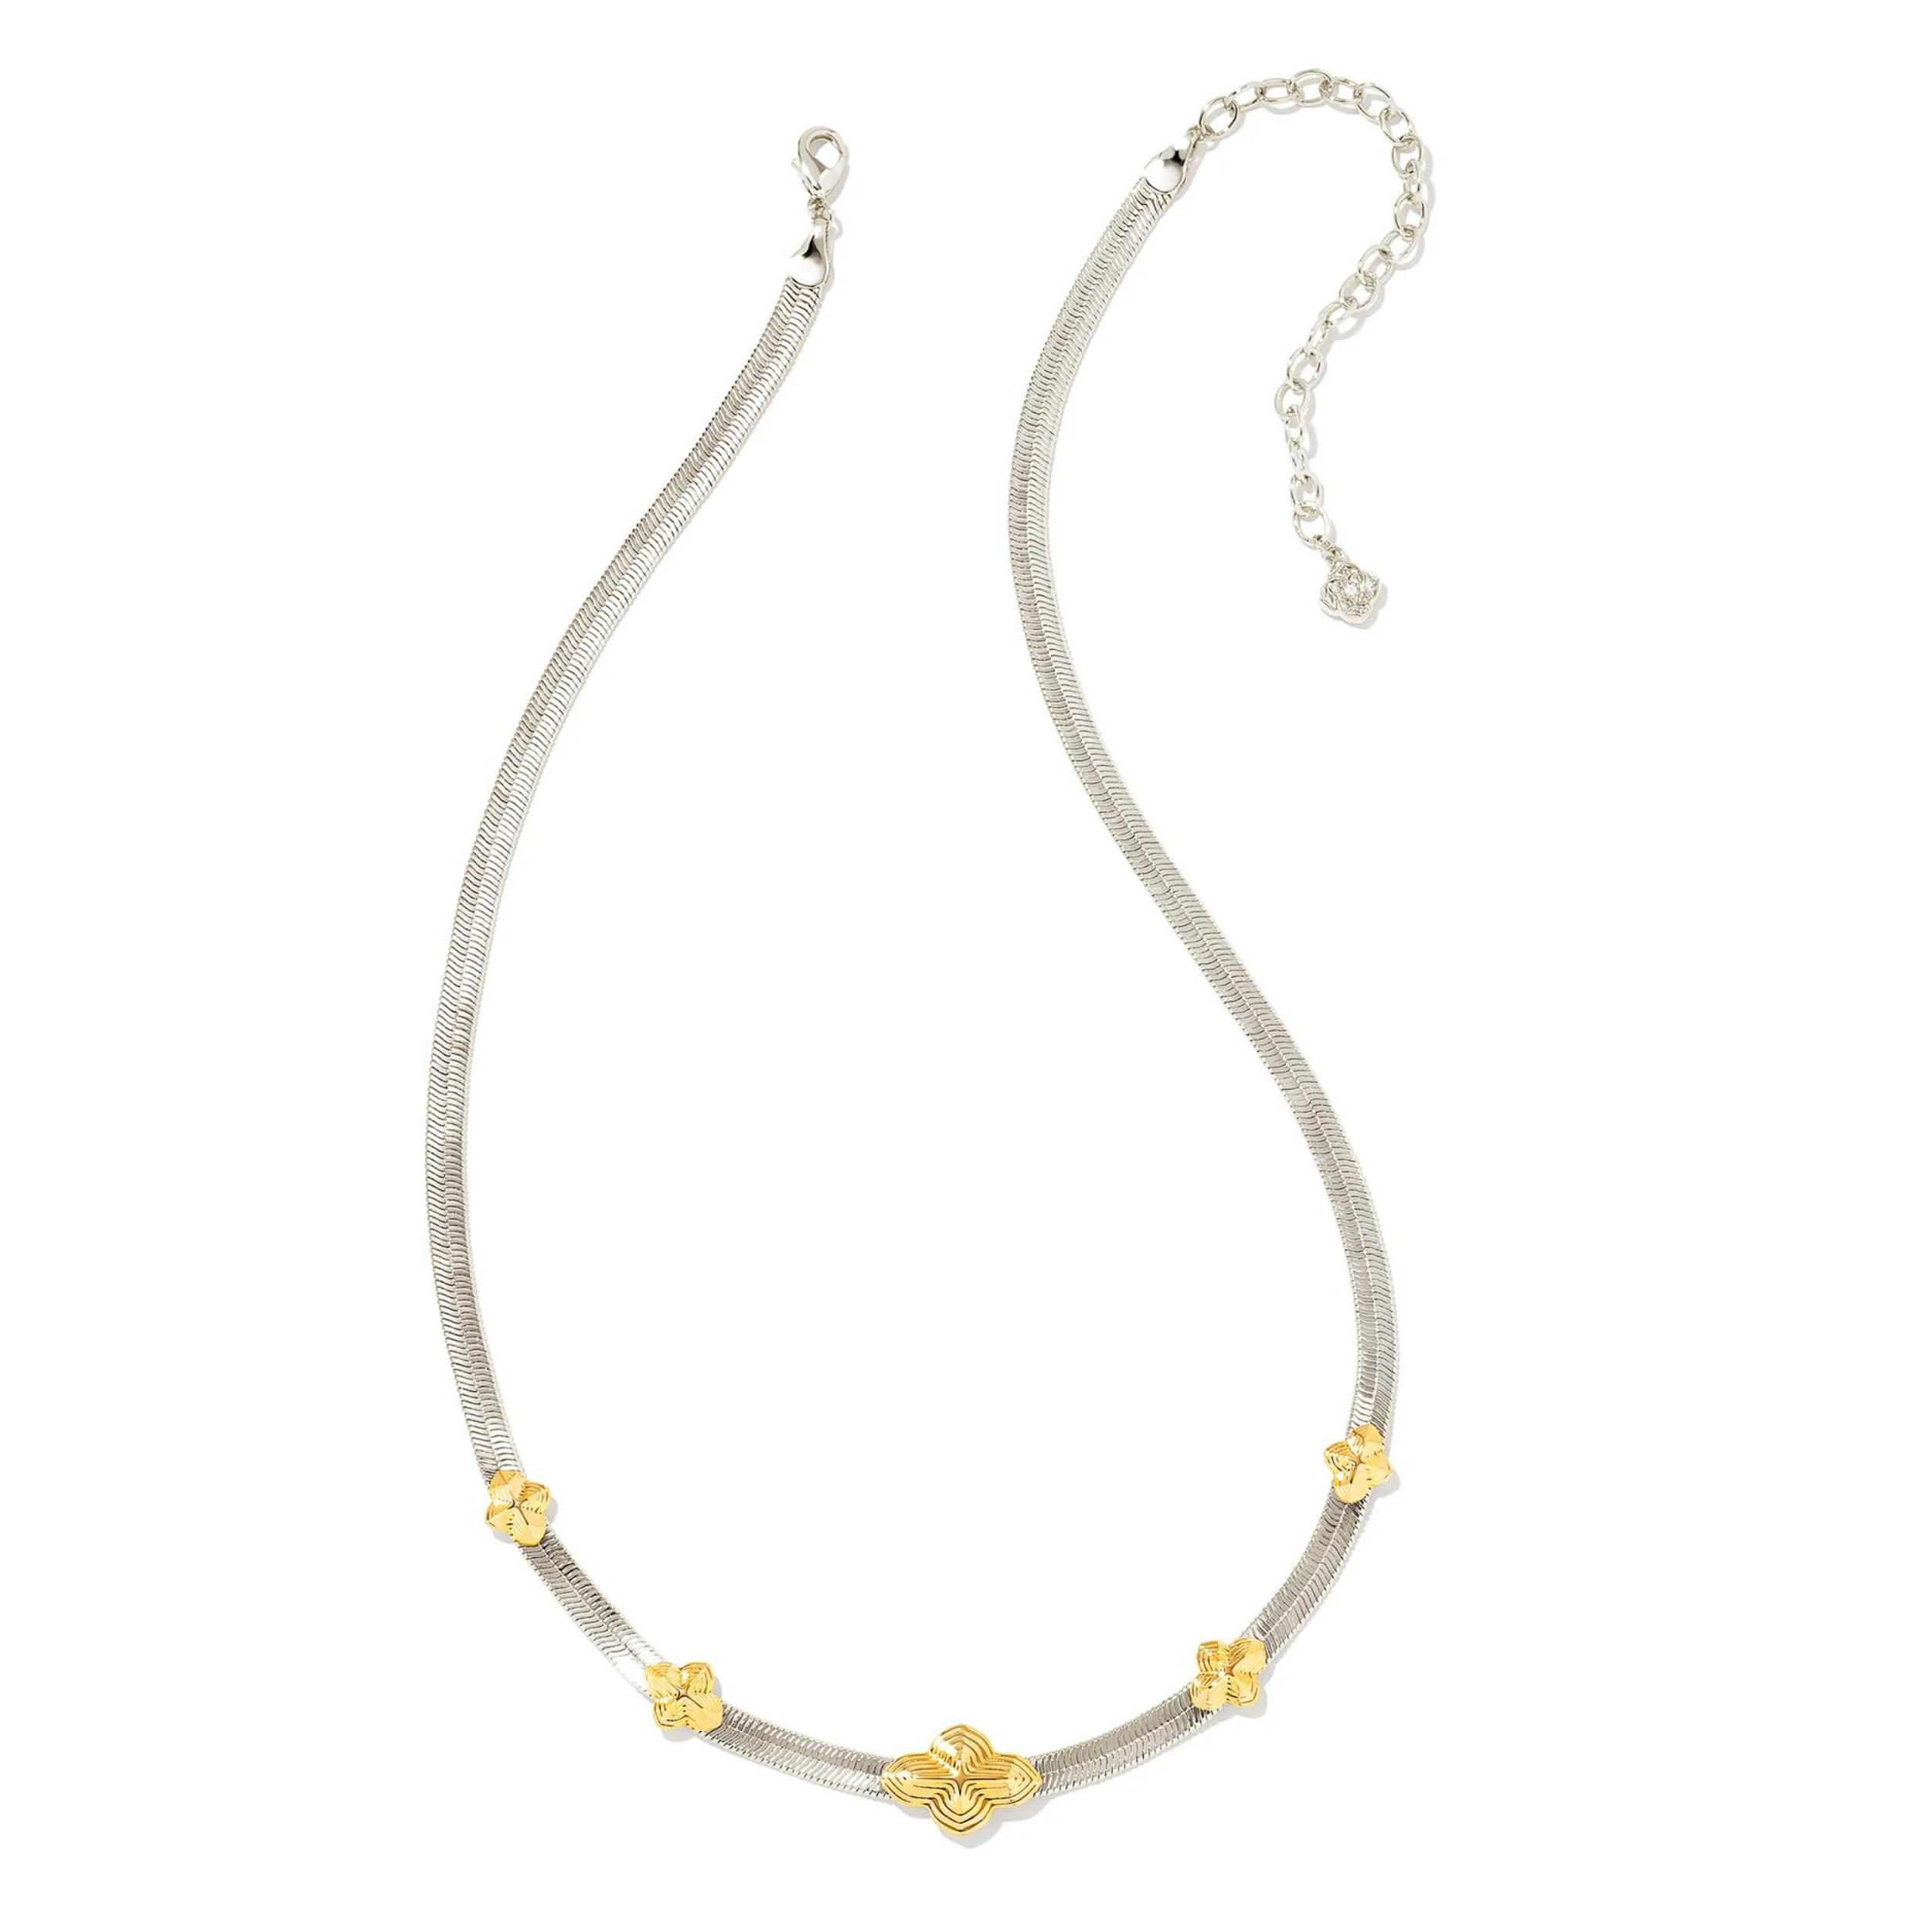 Kendra Scott | Abbie Herringbone Necklace in Mixed Metal - Giddy Up Glamour Boutique